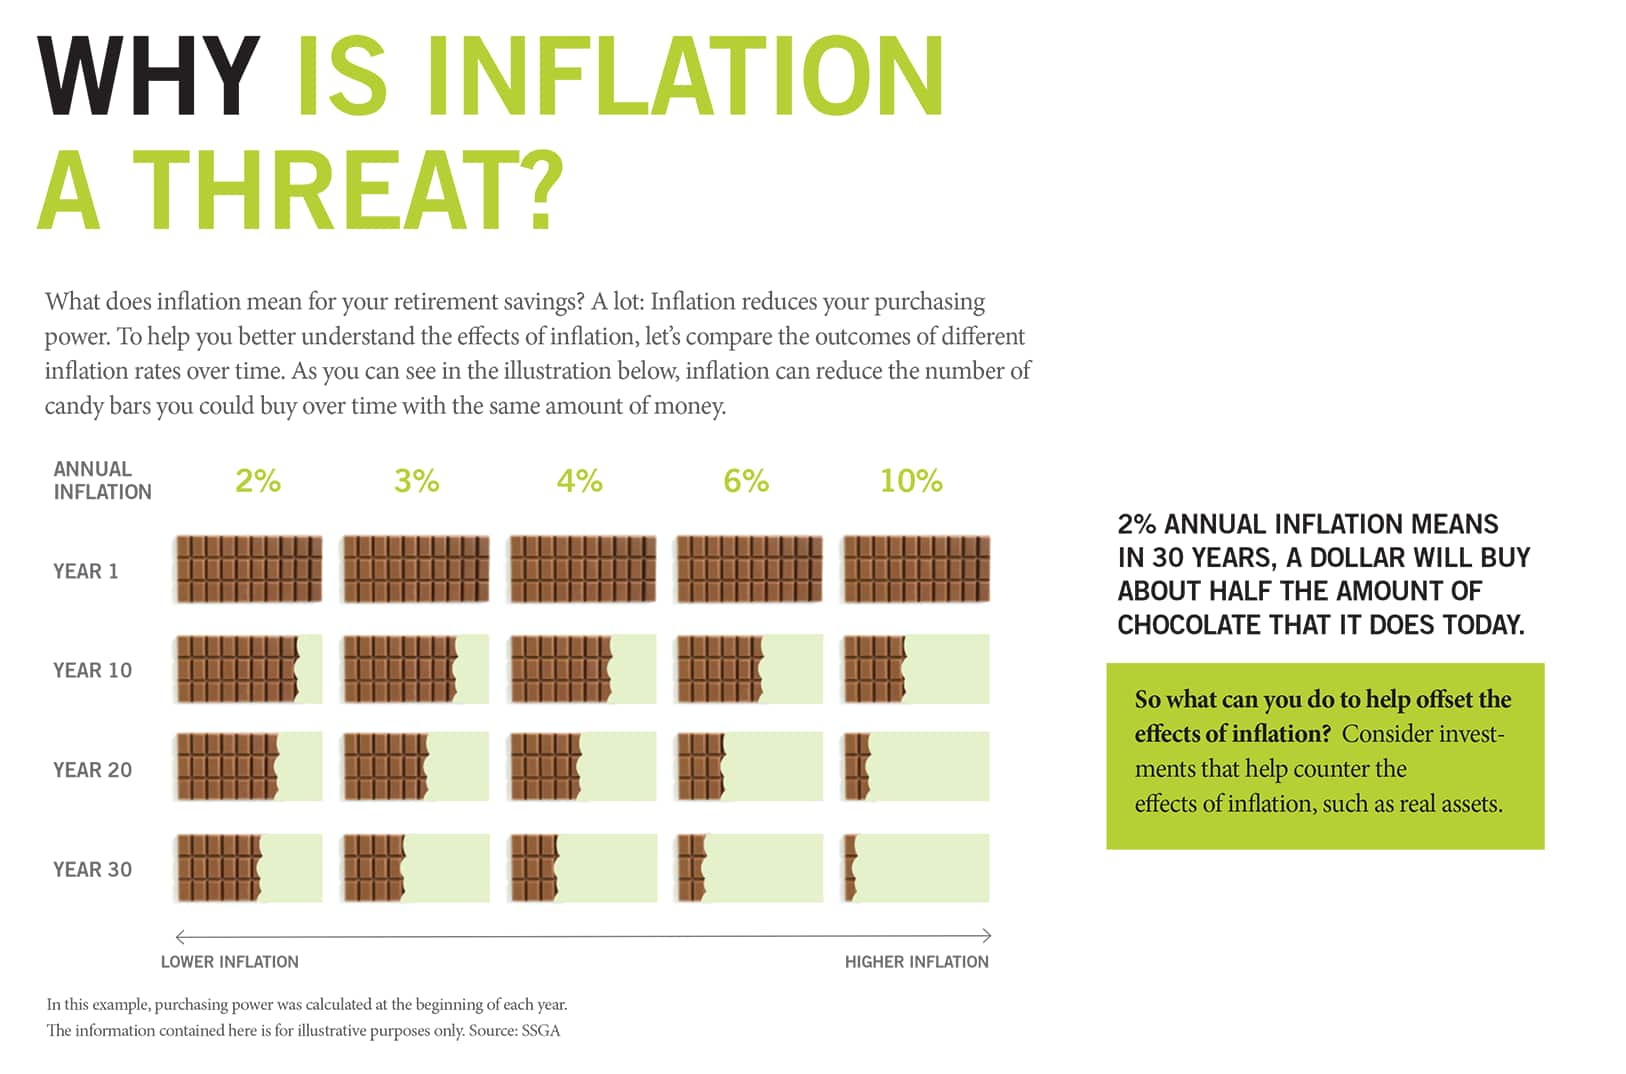 Why is Inflation a Threat